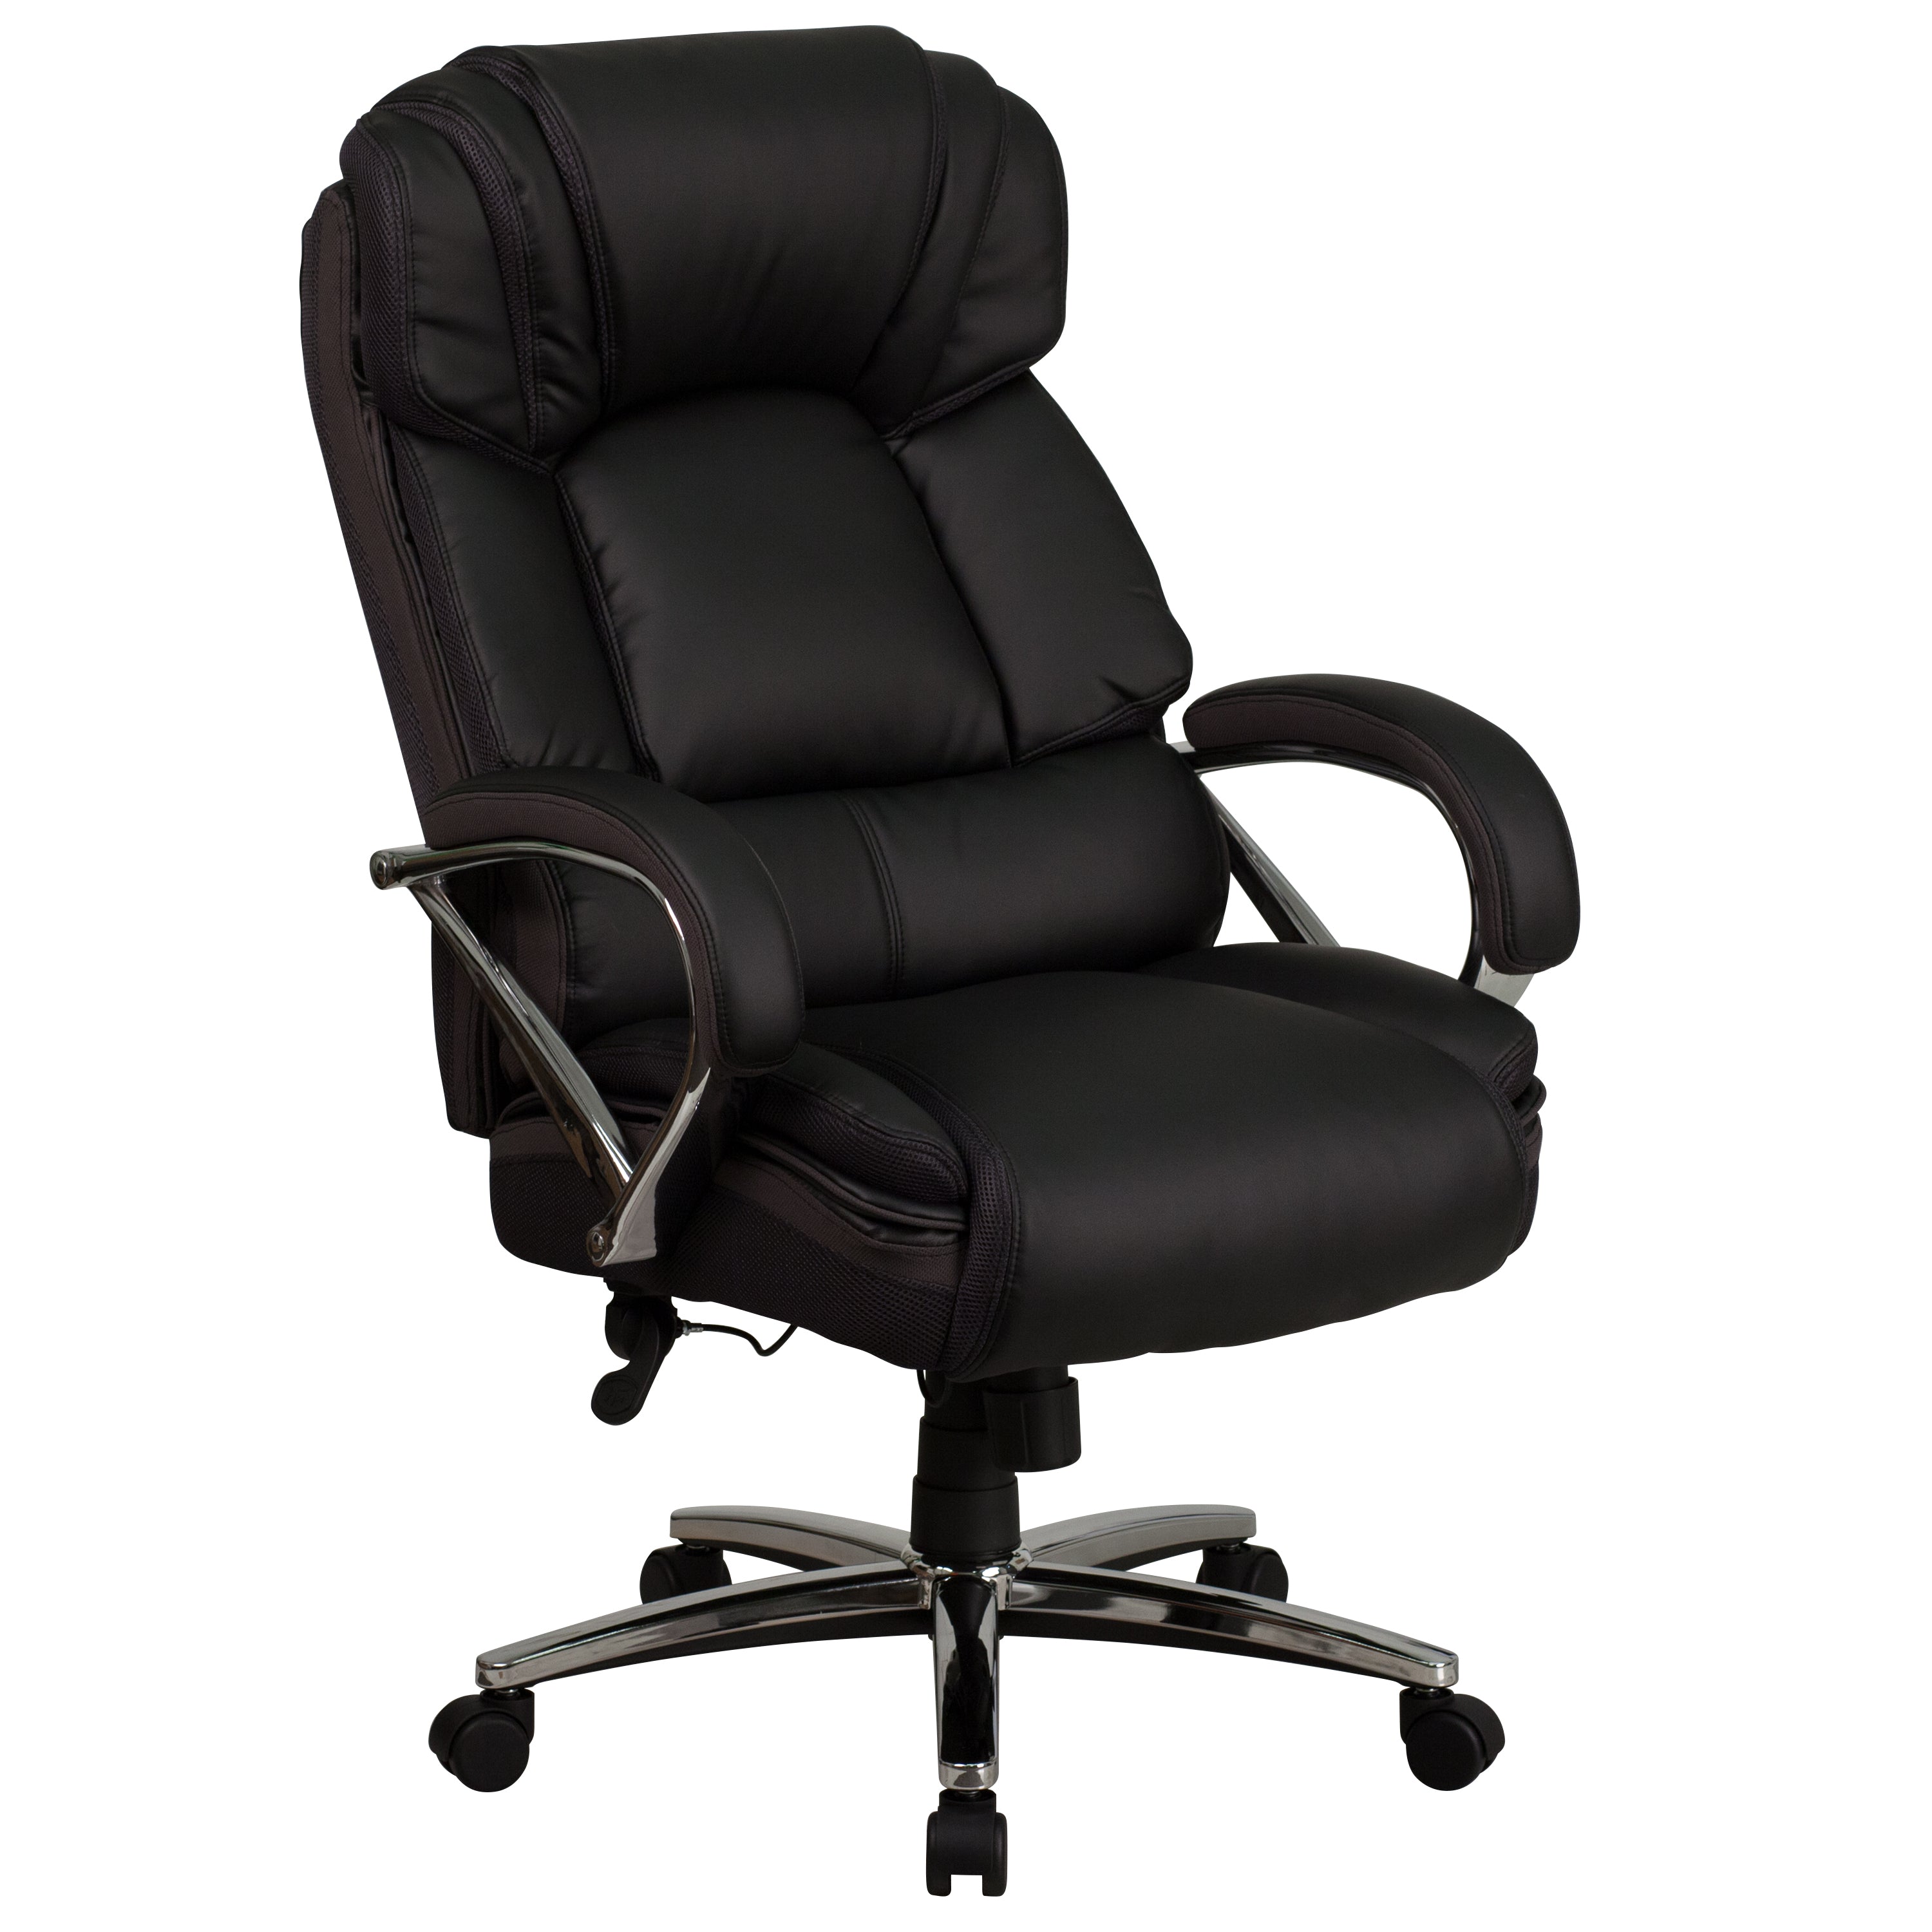 HERCULES Series Big & Tall 500 lb. Rated LeatherSoft Executive Swivel Ergonomic Office Chair with Chrome Base and Arms-Big & Tall Office Chair-Flash Furniture-Wall2Wall Furnishings